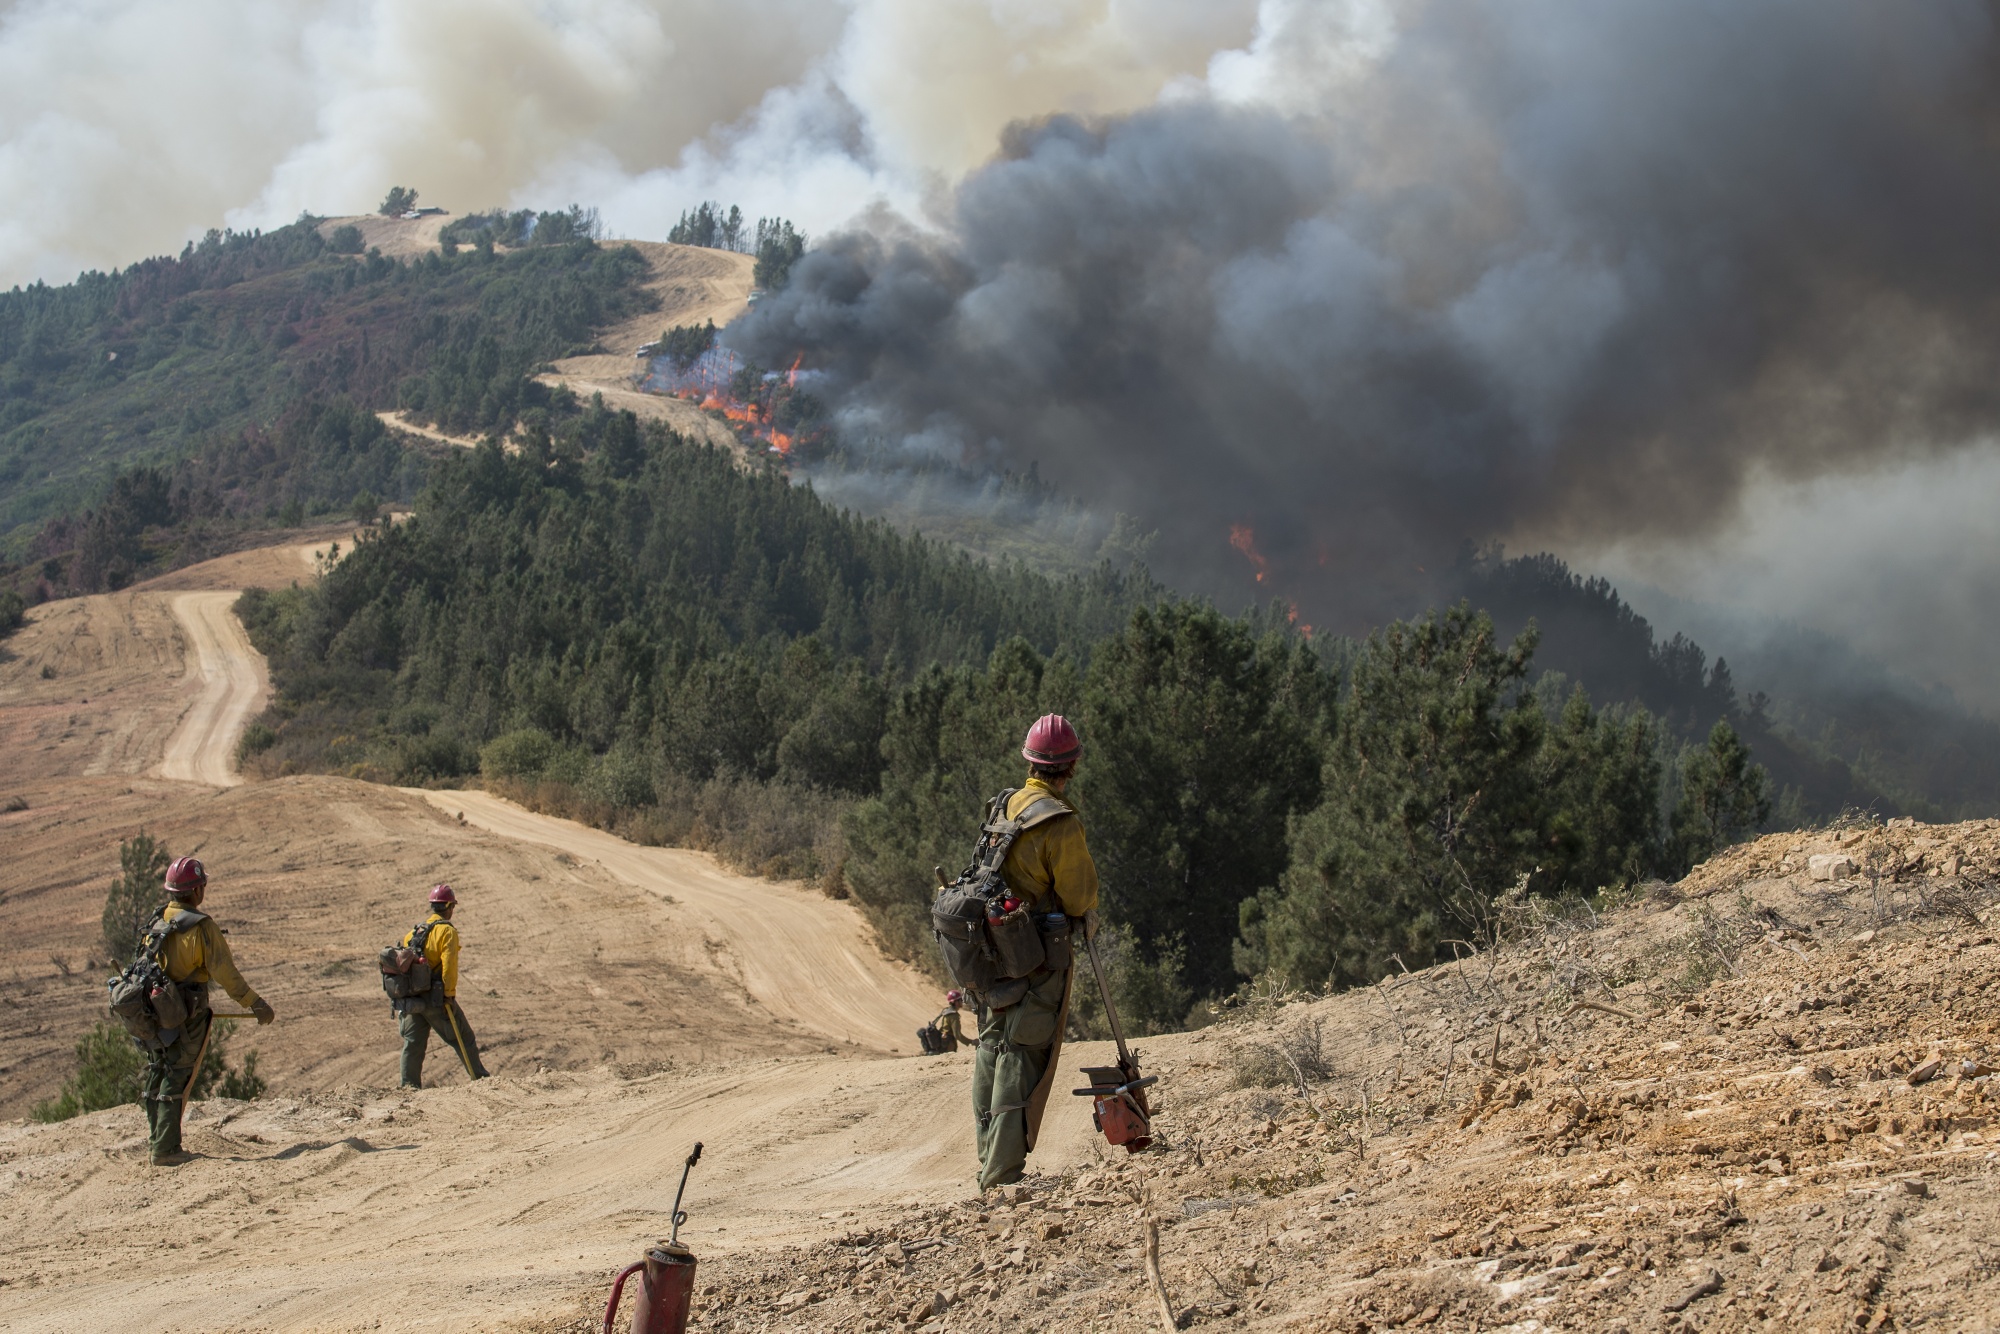 Firefighter monitor a controlled burn while fighting the Dolan Fire near Jolon, California on Sept. 16.